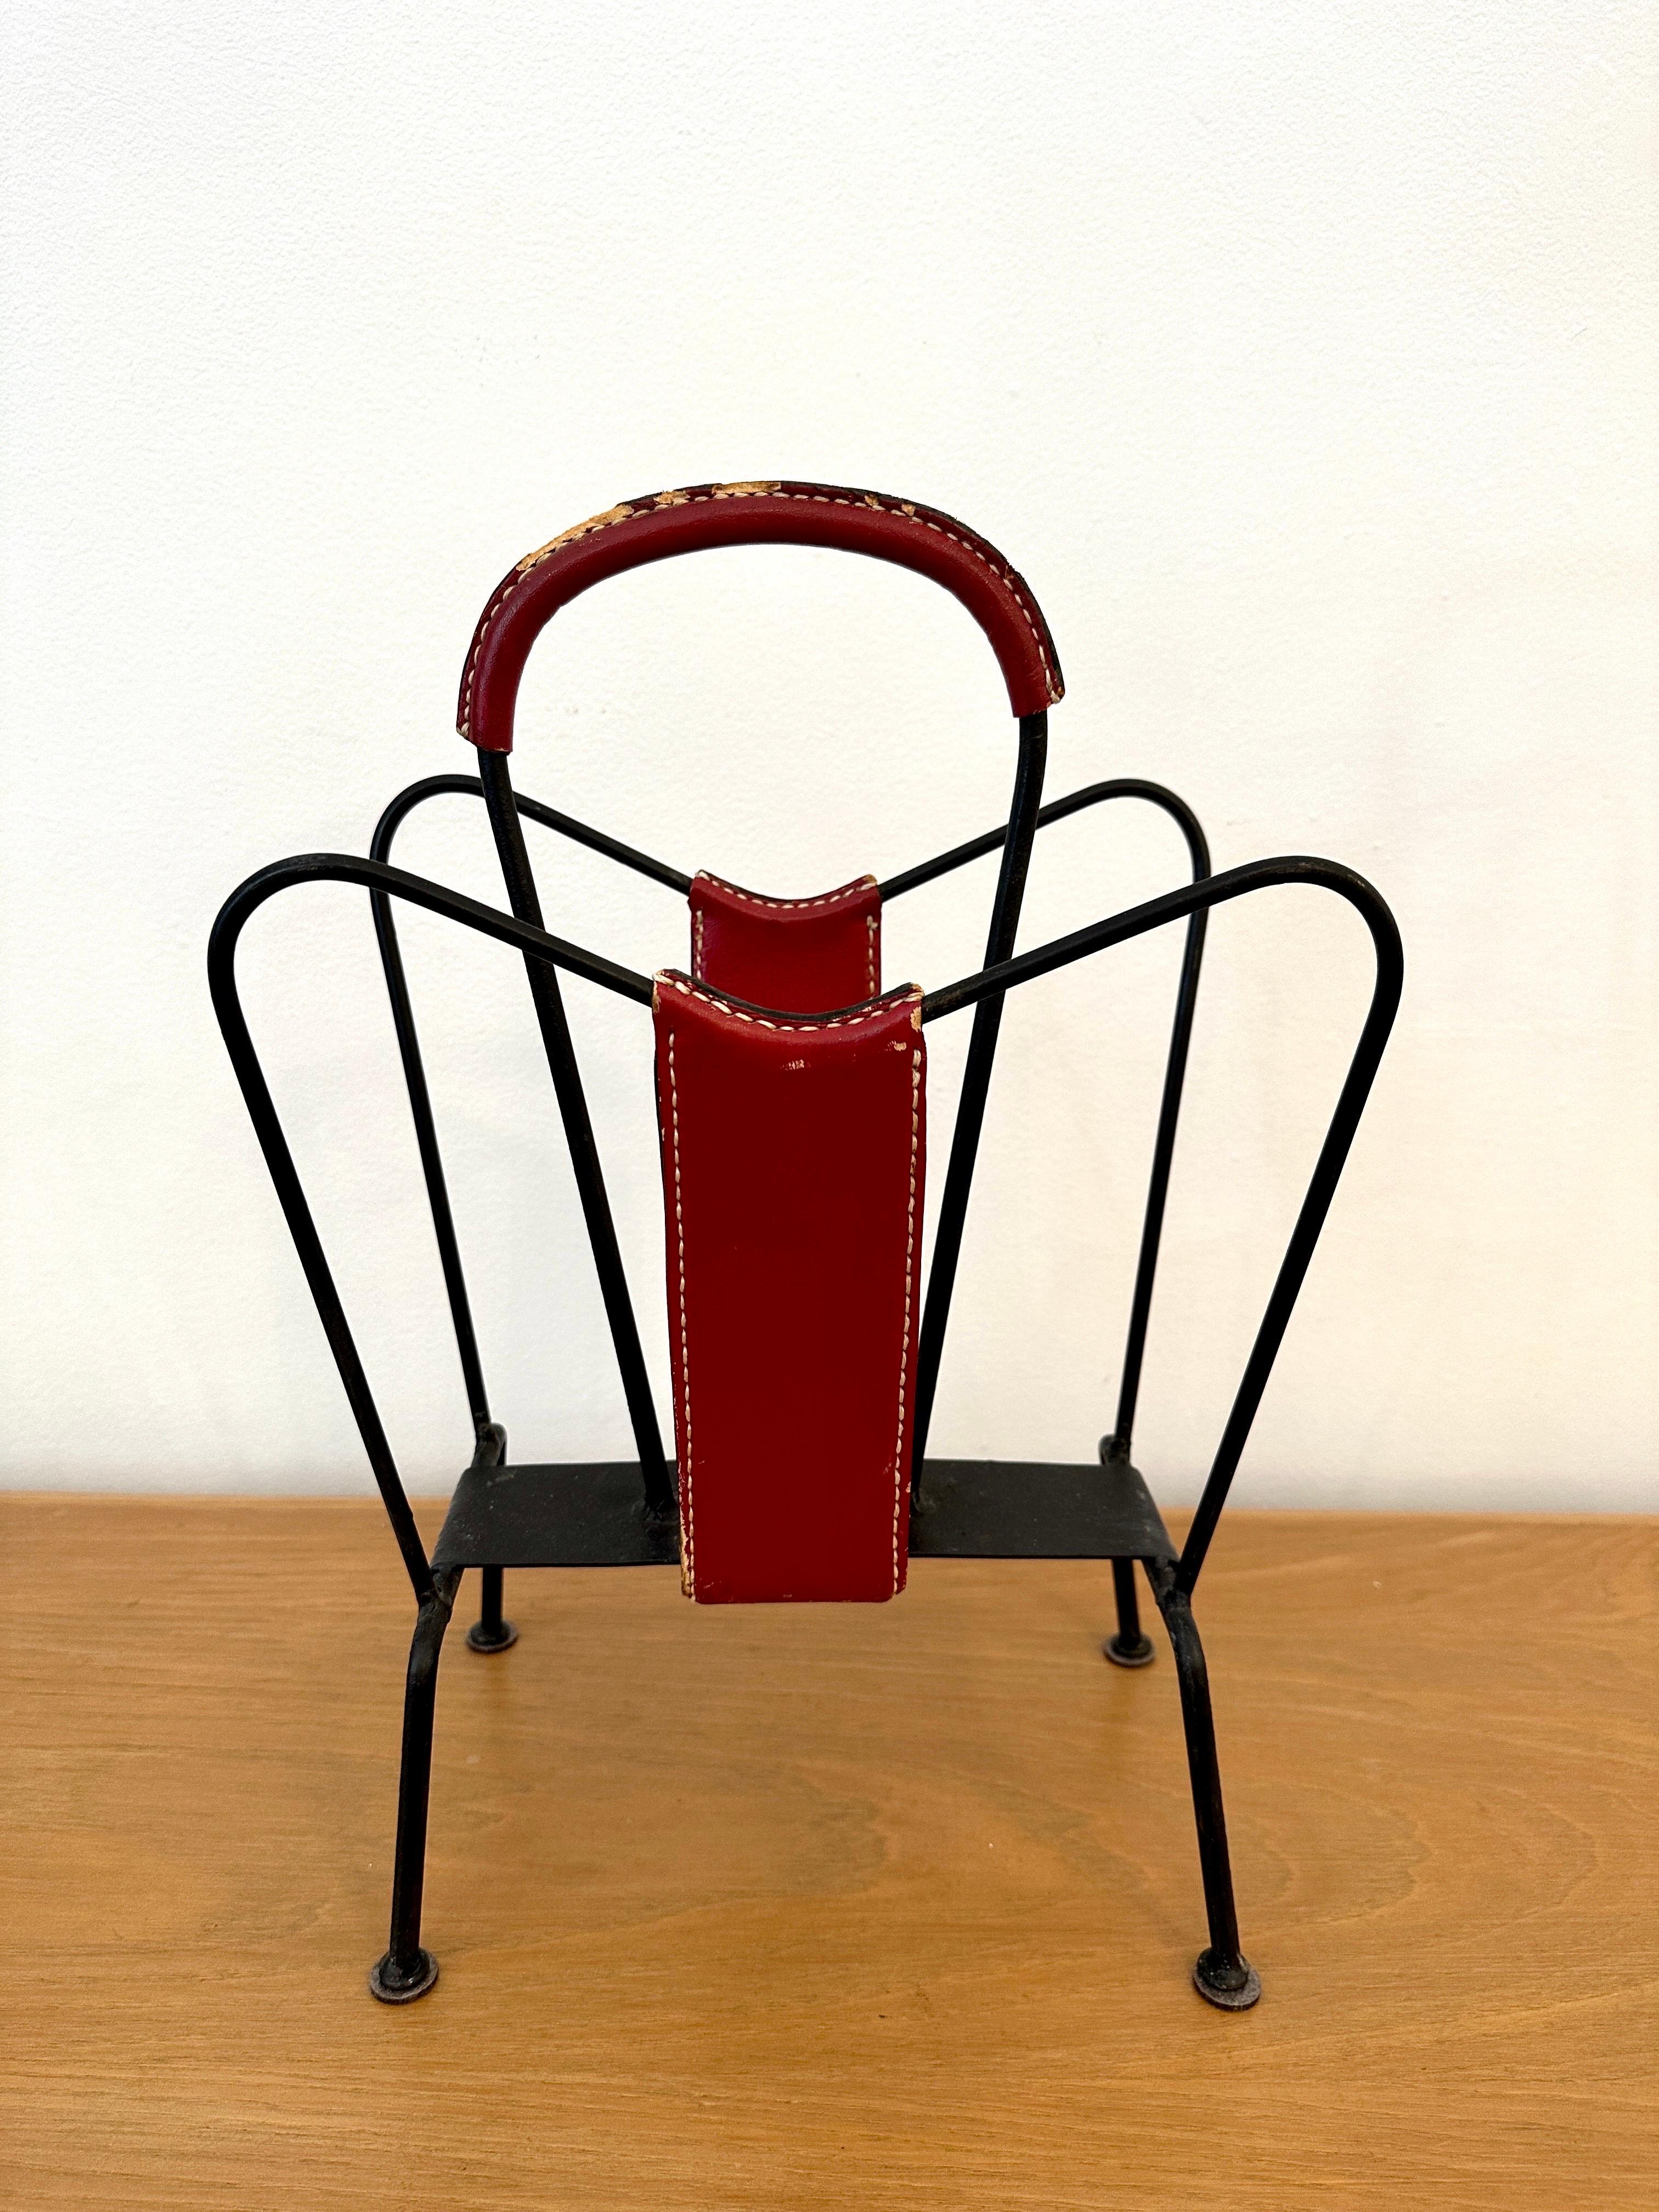 Vintage Jacques Adnet Red Stitched Leather Magazine Stand In Good Condition For Sale In East Hampton, NY